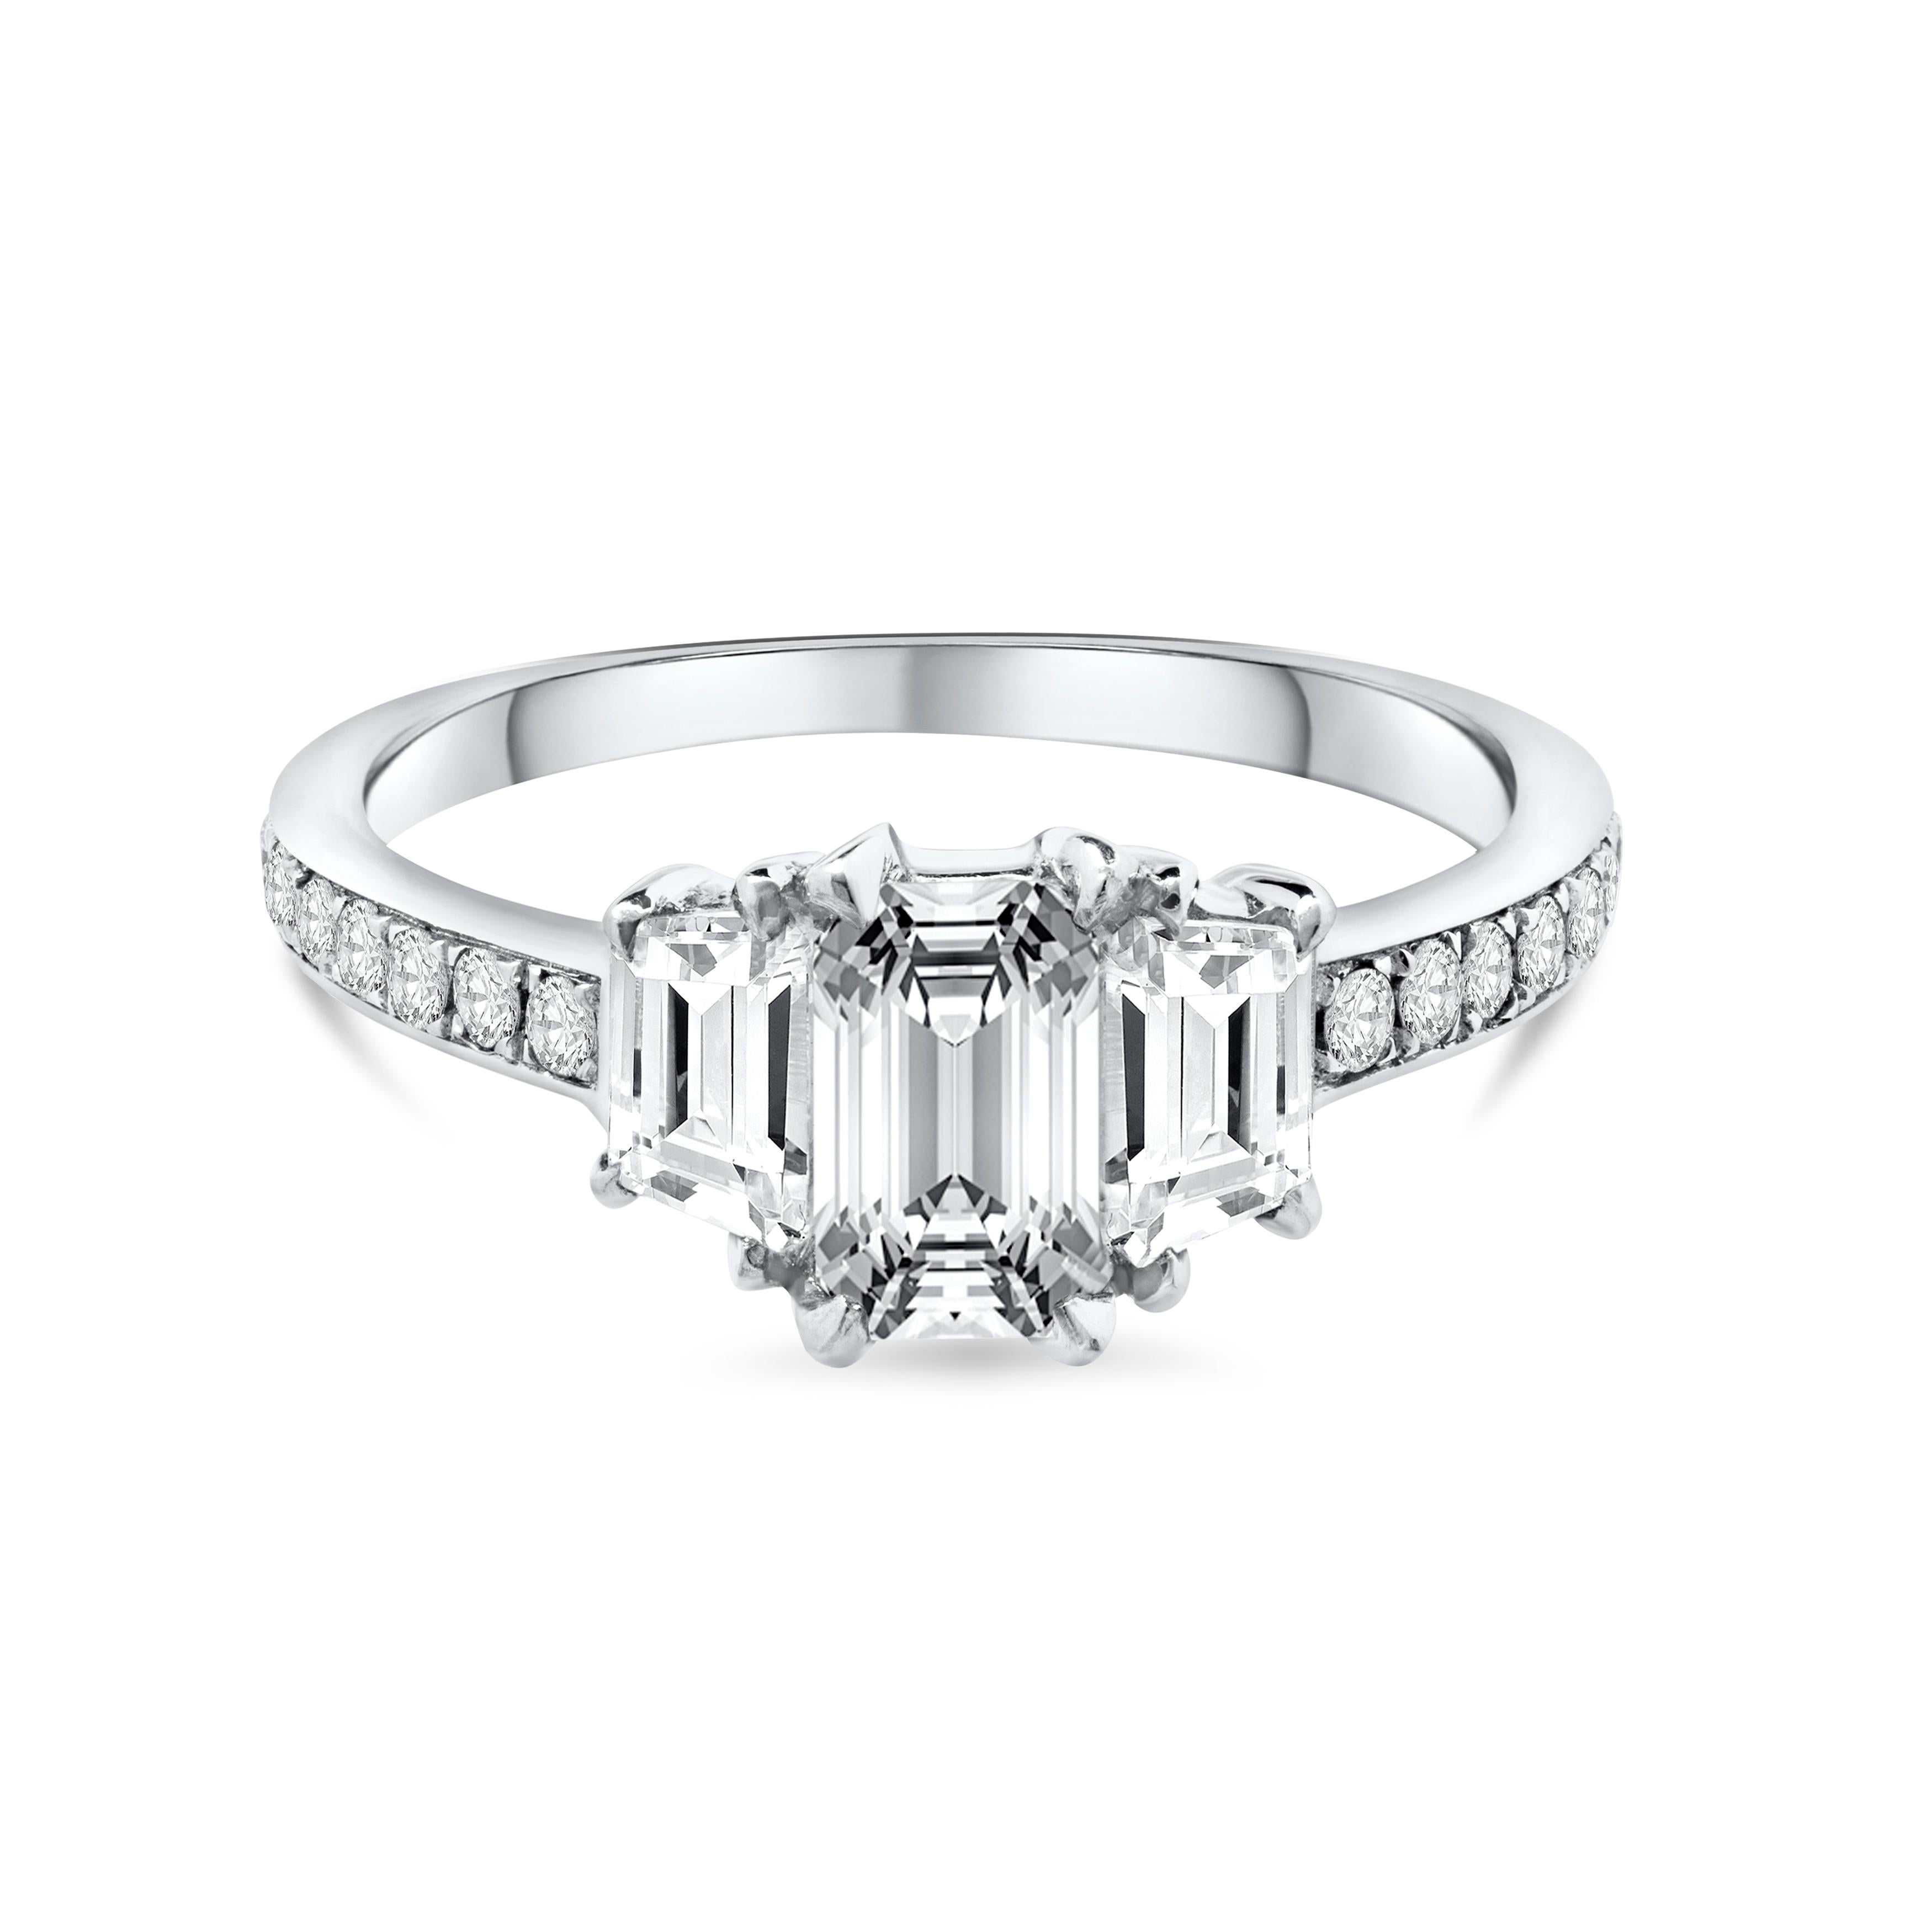 Classic and elegant in style, this three stone ring is set with a gorgeous 0.70 carat emerald cut diamond center certified by GIA as F color and SI1 clarity. Flanked by a trapezoid diamond on either side, weighing 0.45 carat total. Accented with